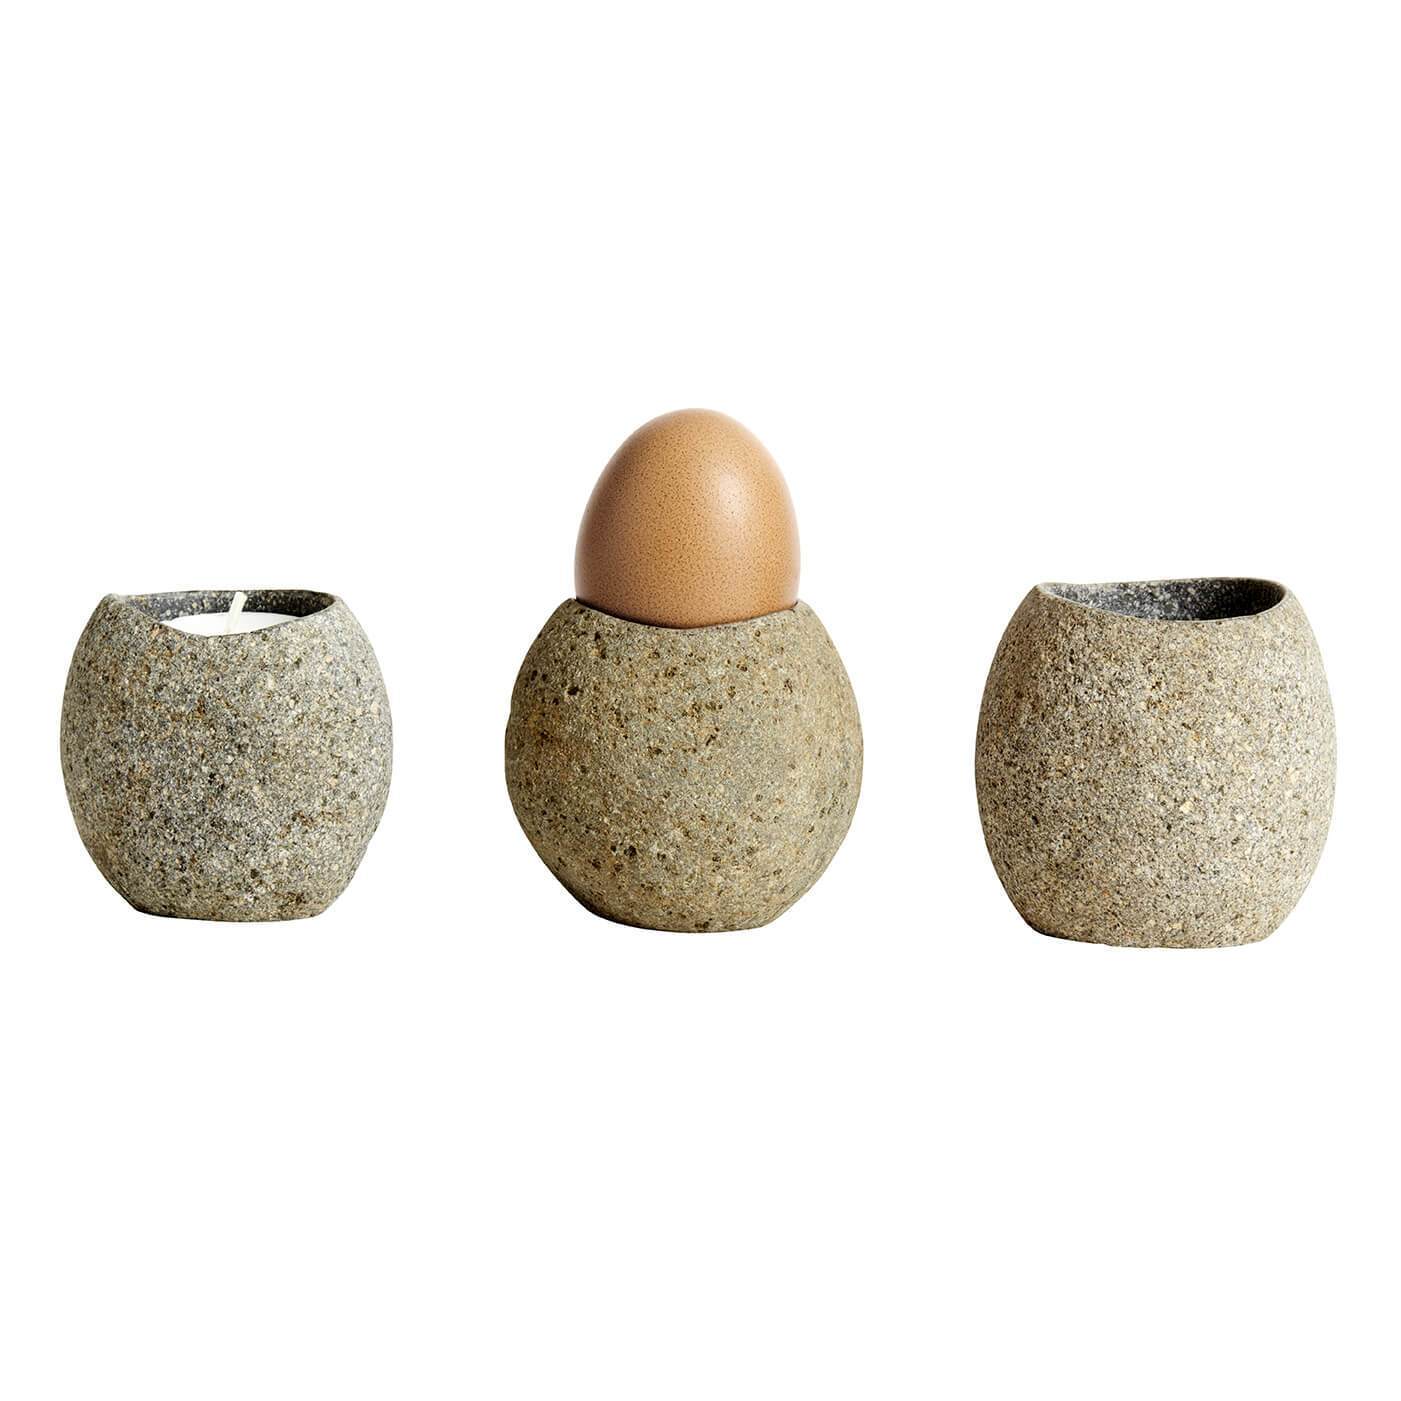 Muubs Valley Egg Cup Riverstone, 7cm